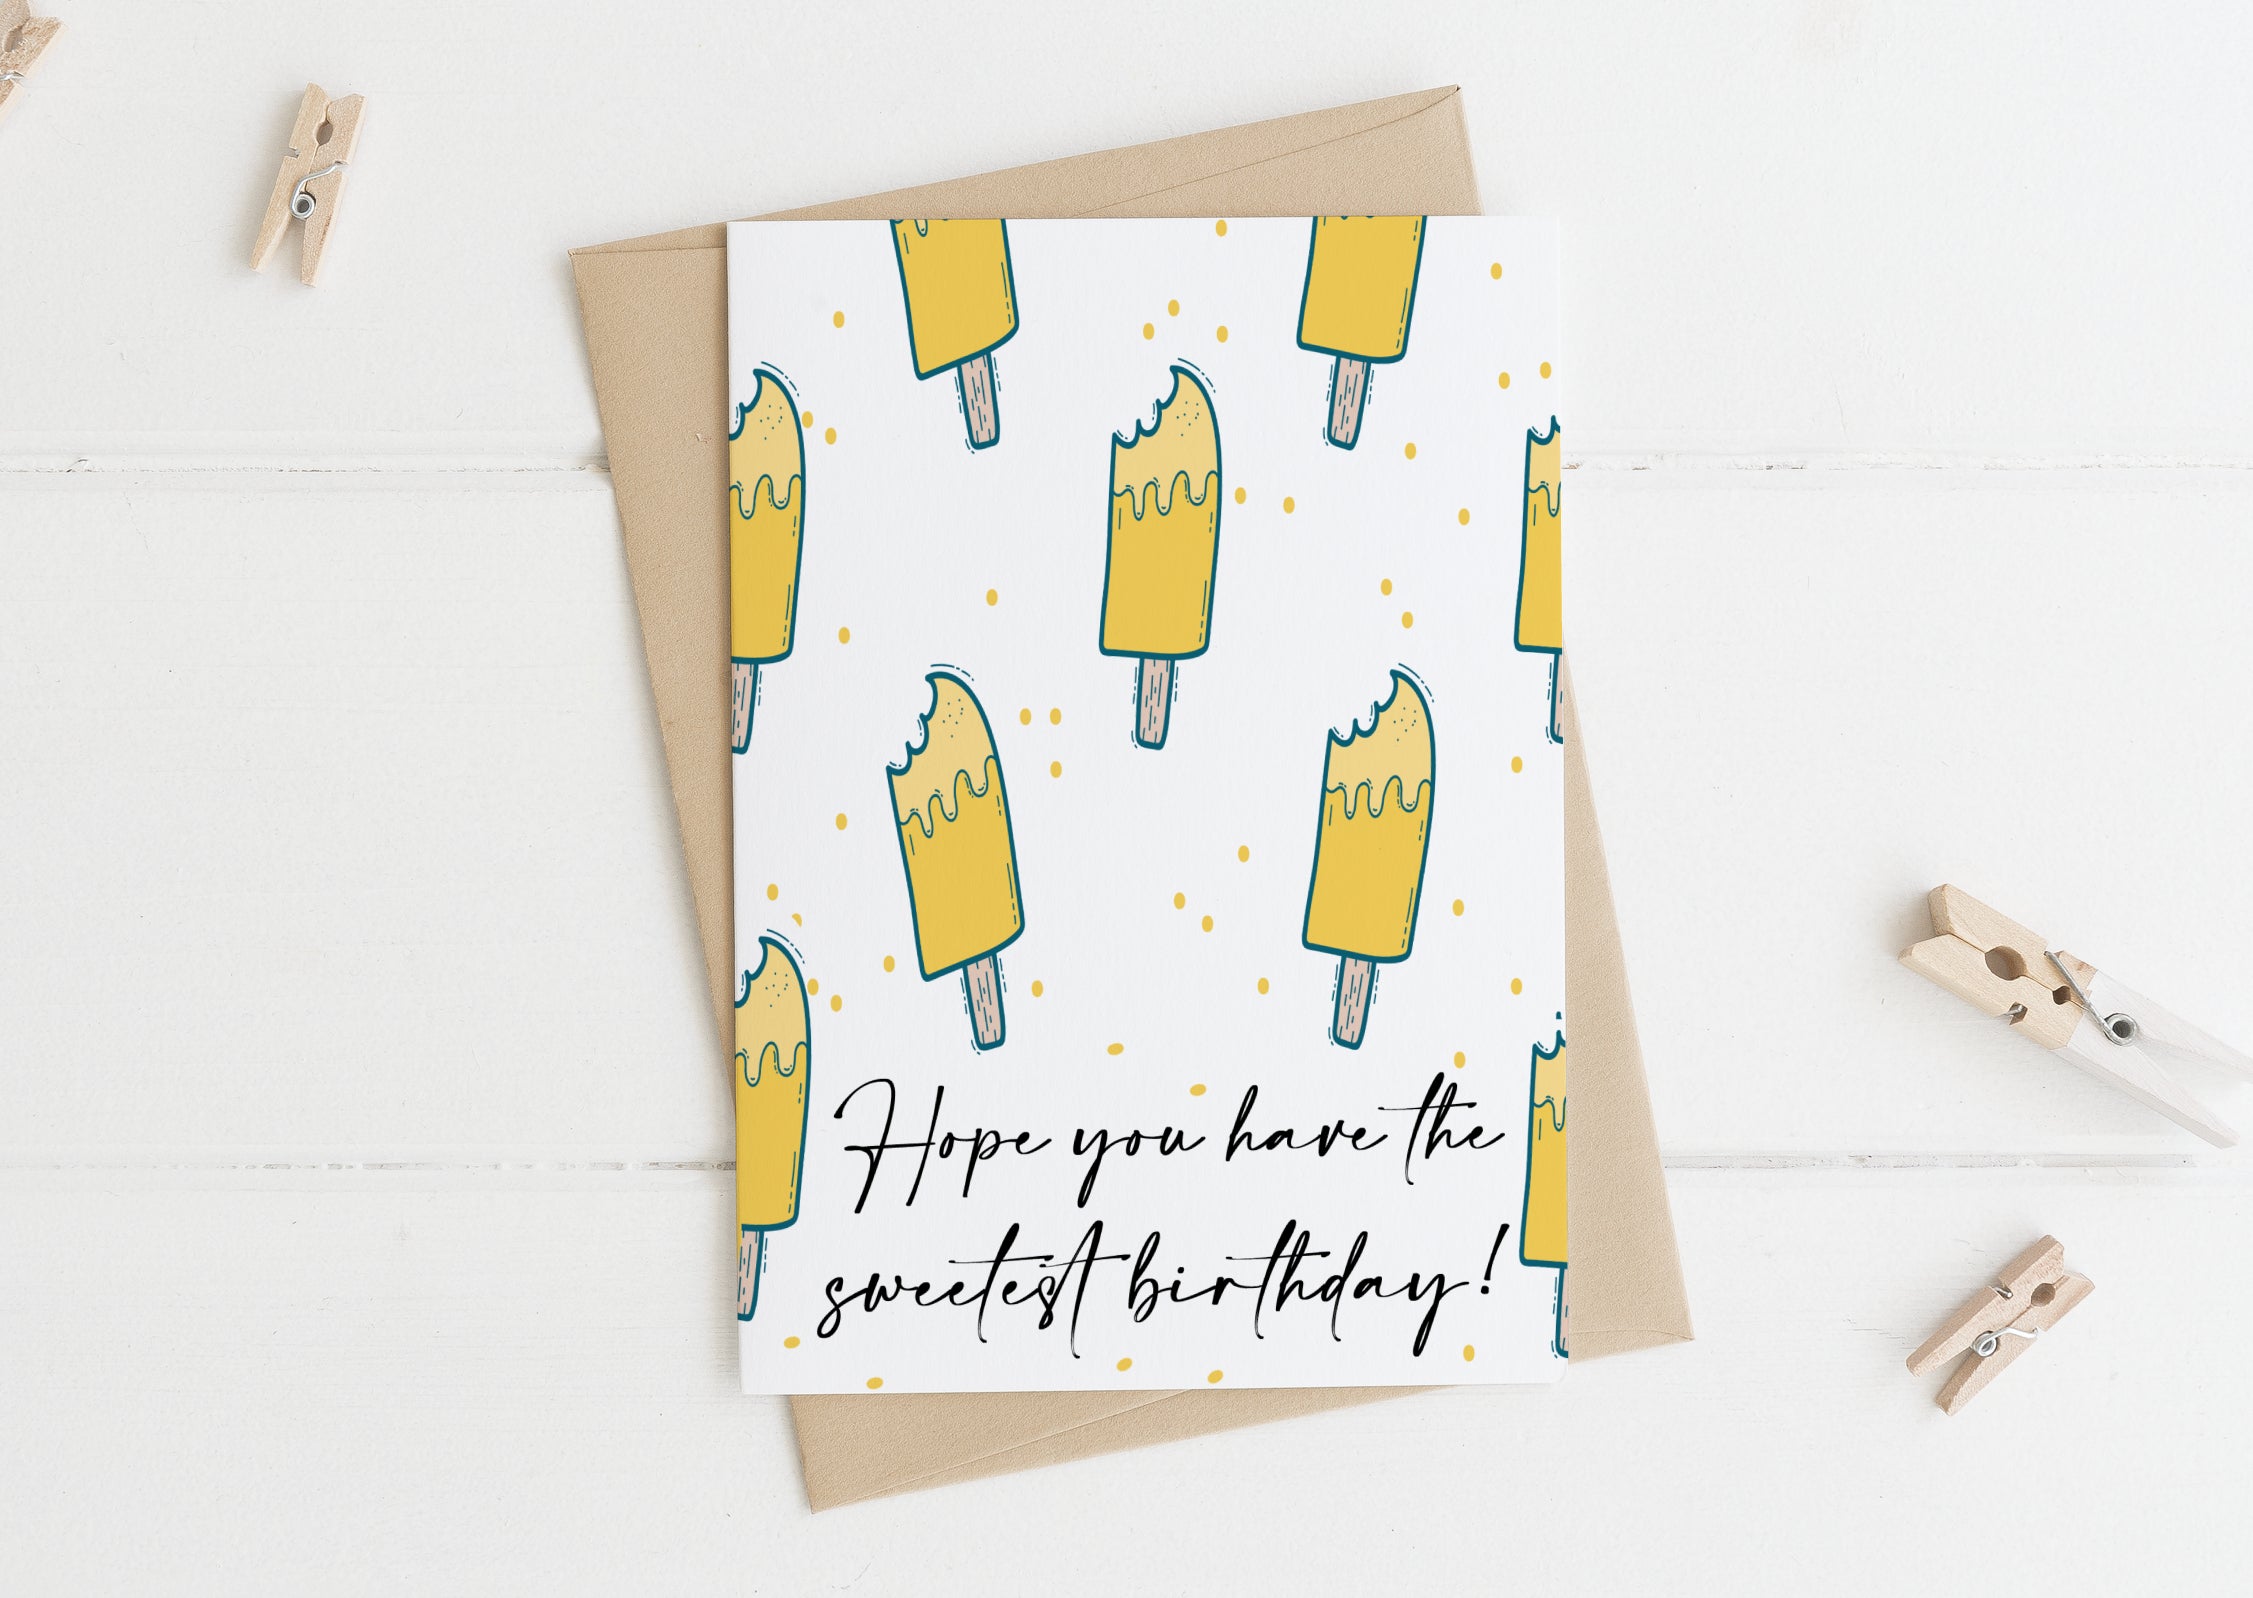 Have The Sweetest Birthday! - Greeting Card